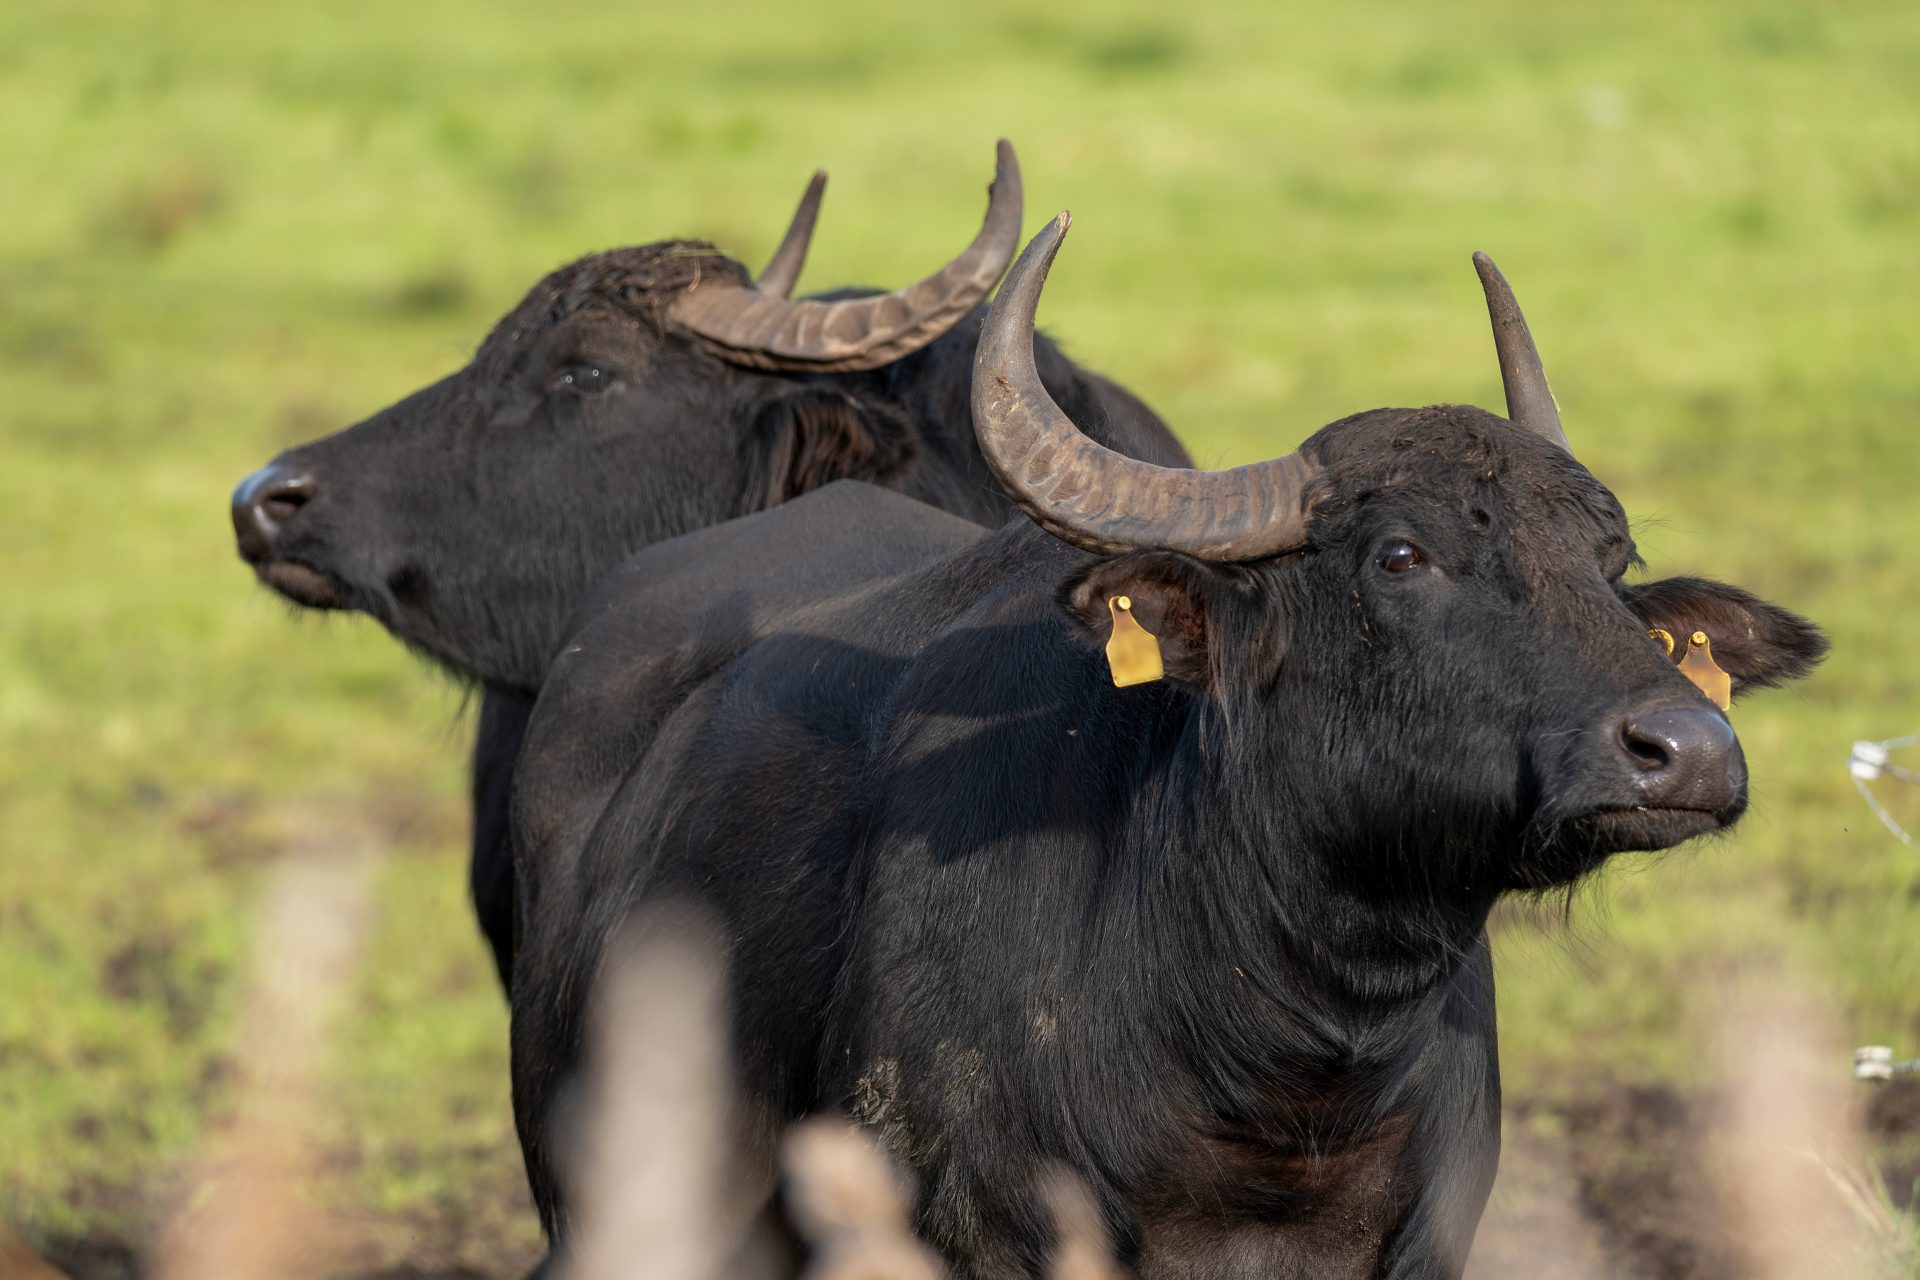 Water buffalo are saving other animals from extinction